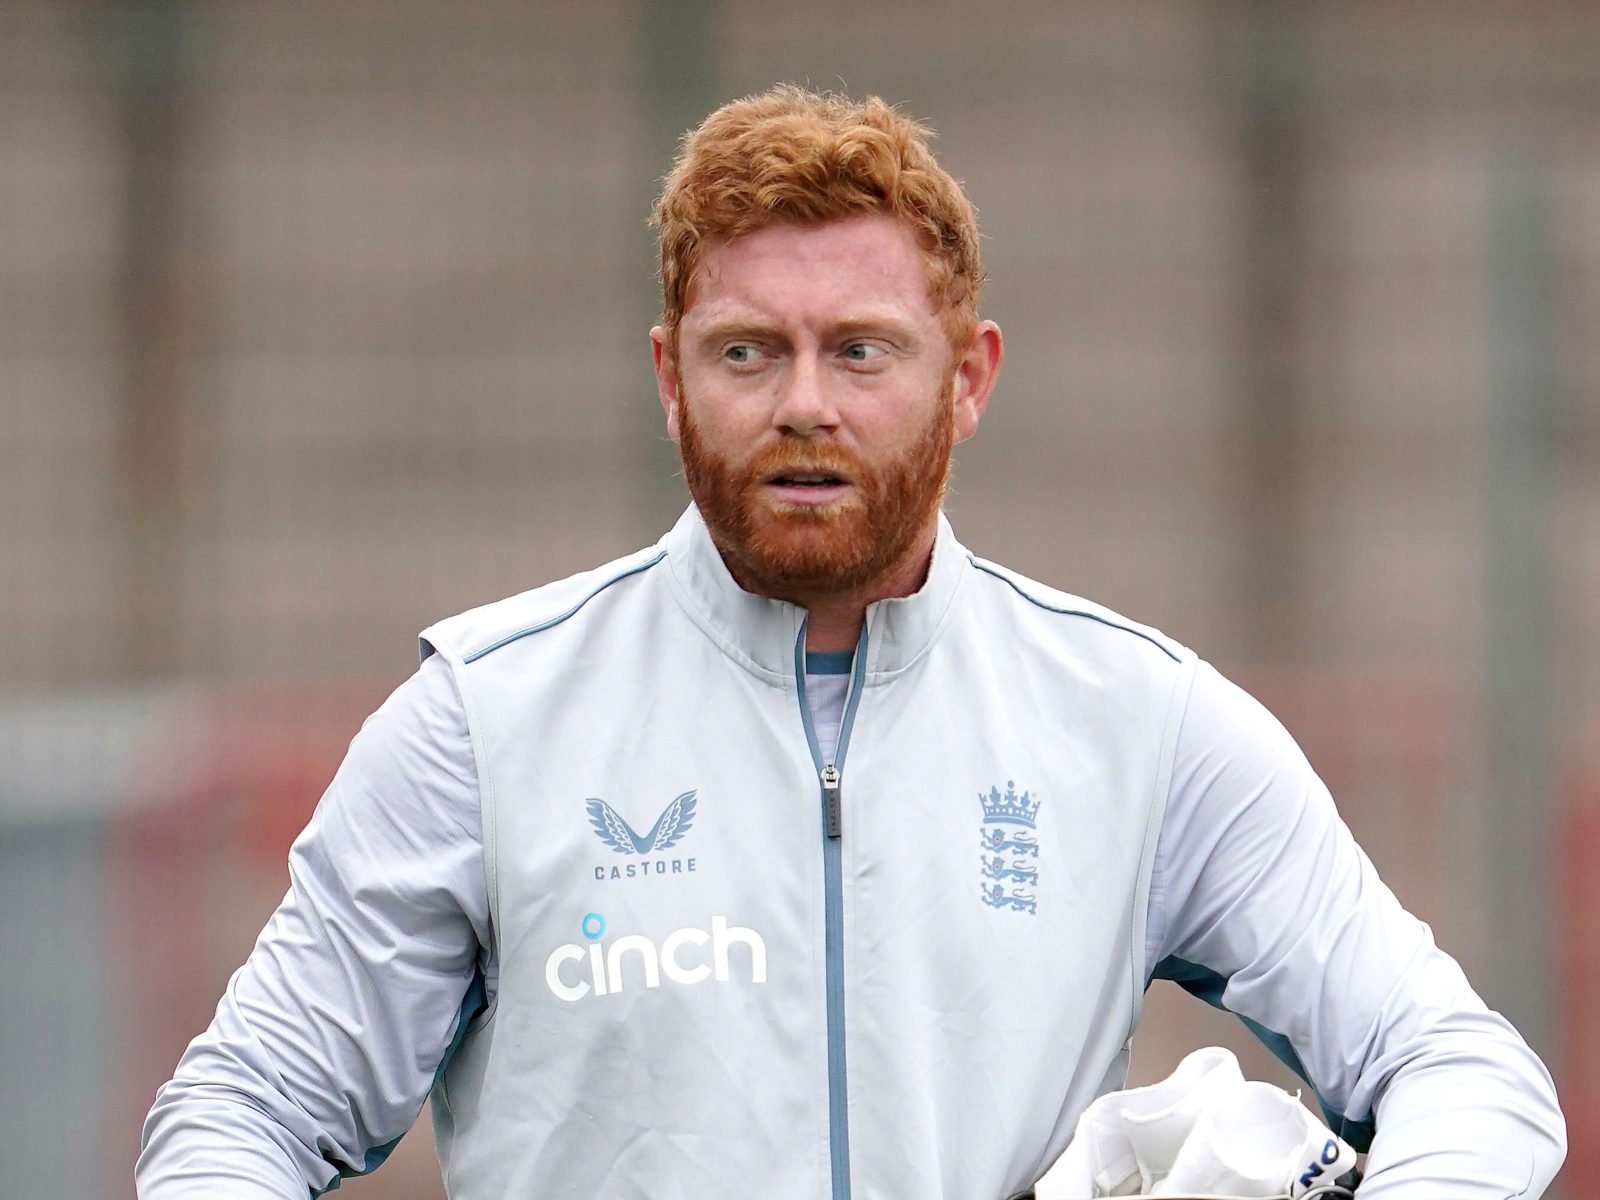 England's Jonny Bairstow Ruled Out of T20 World Cup after 'Freak Accident'